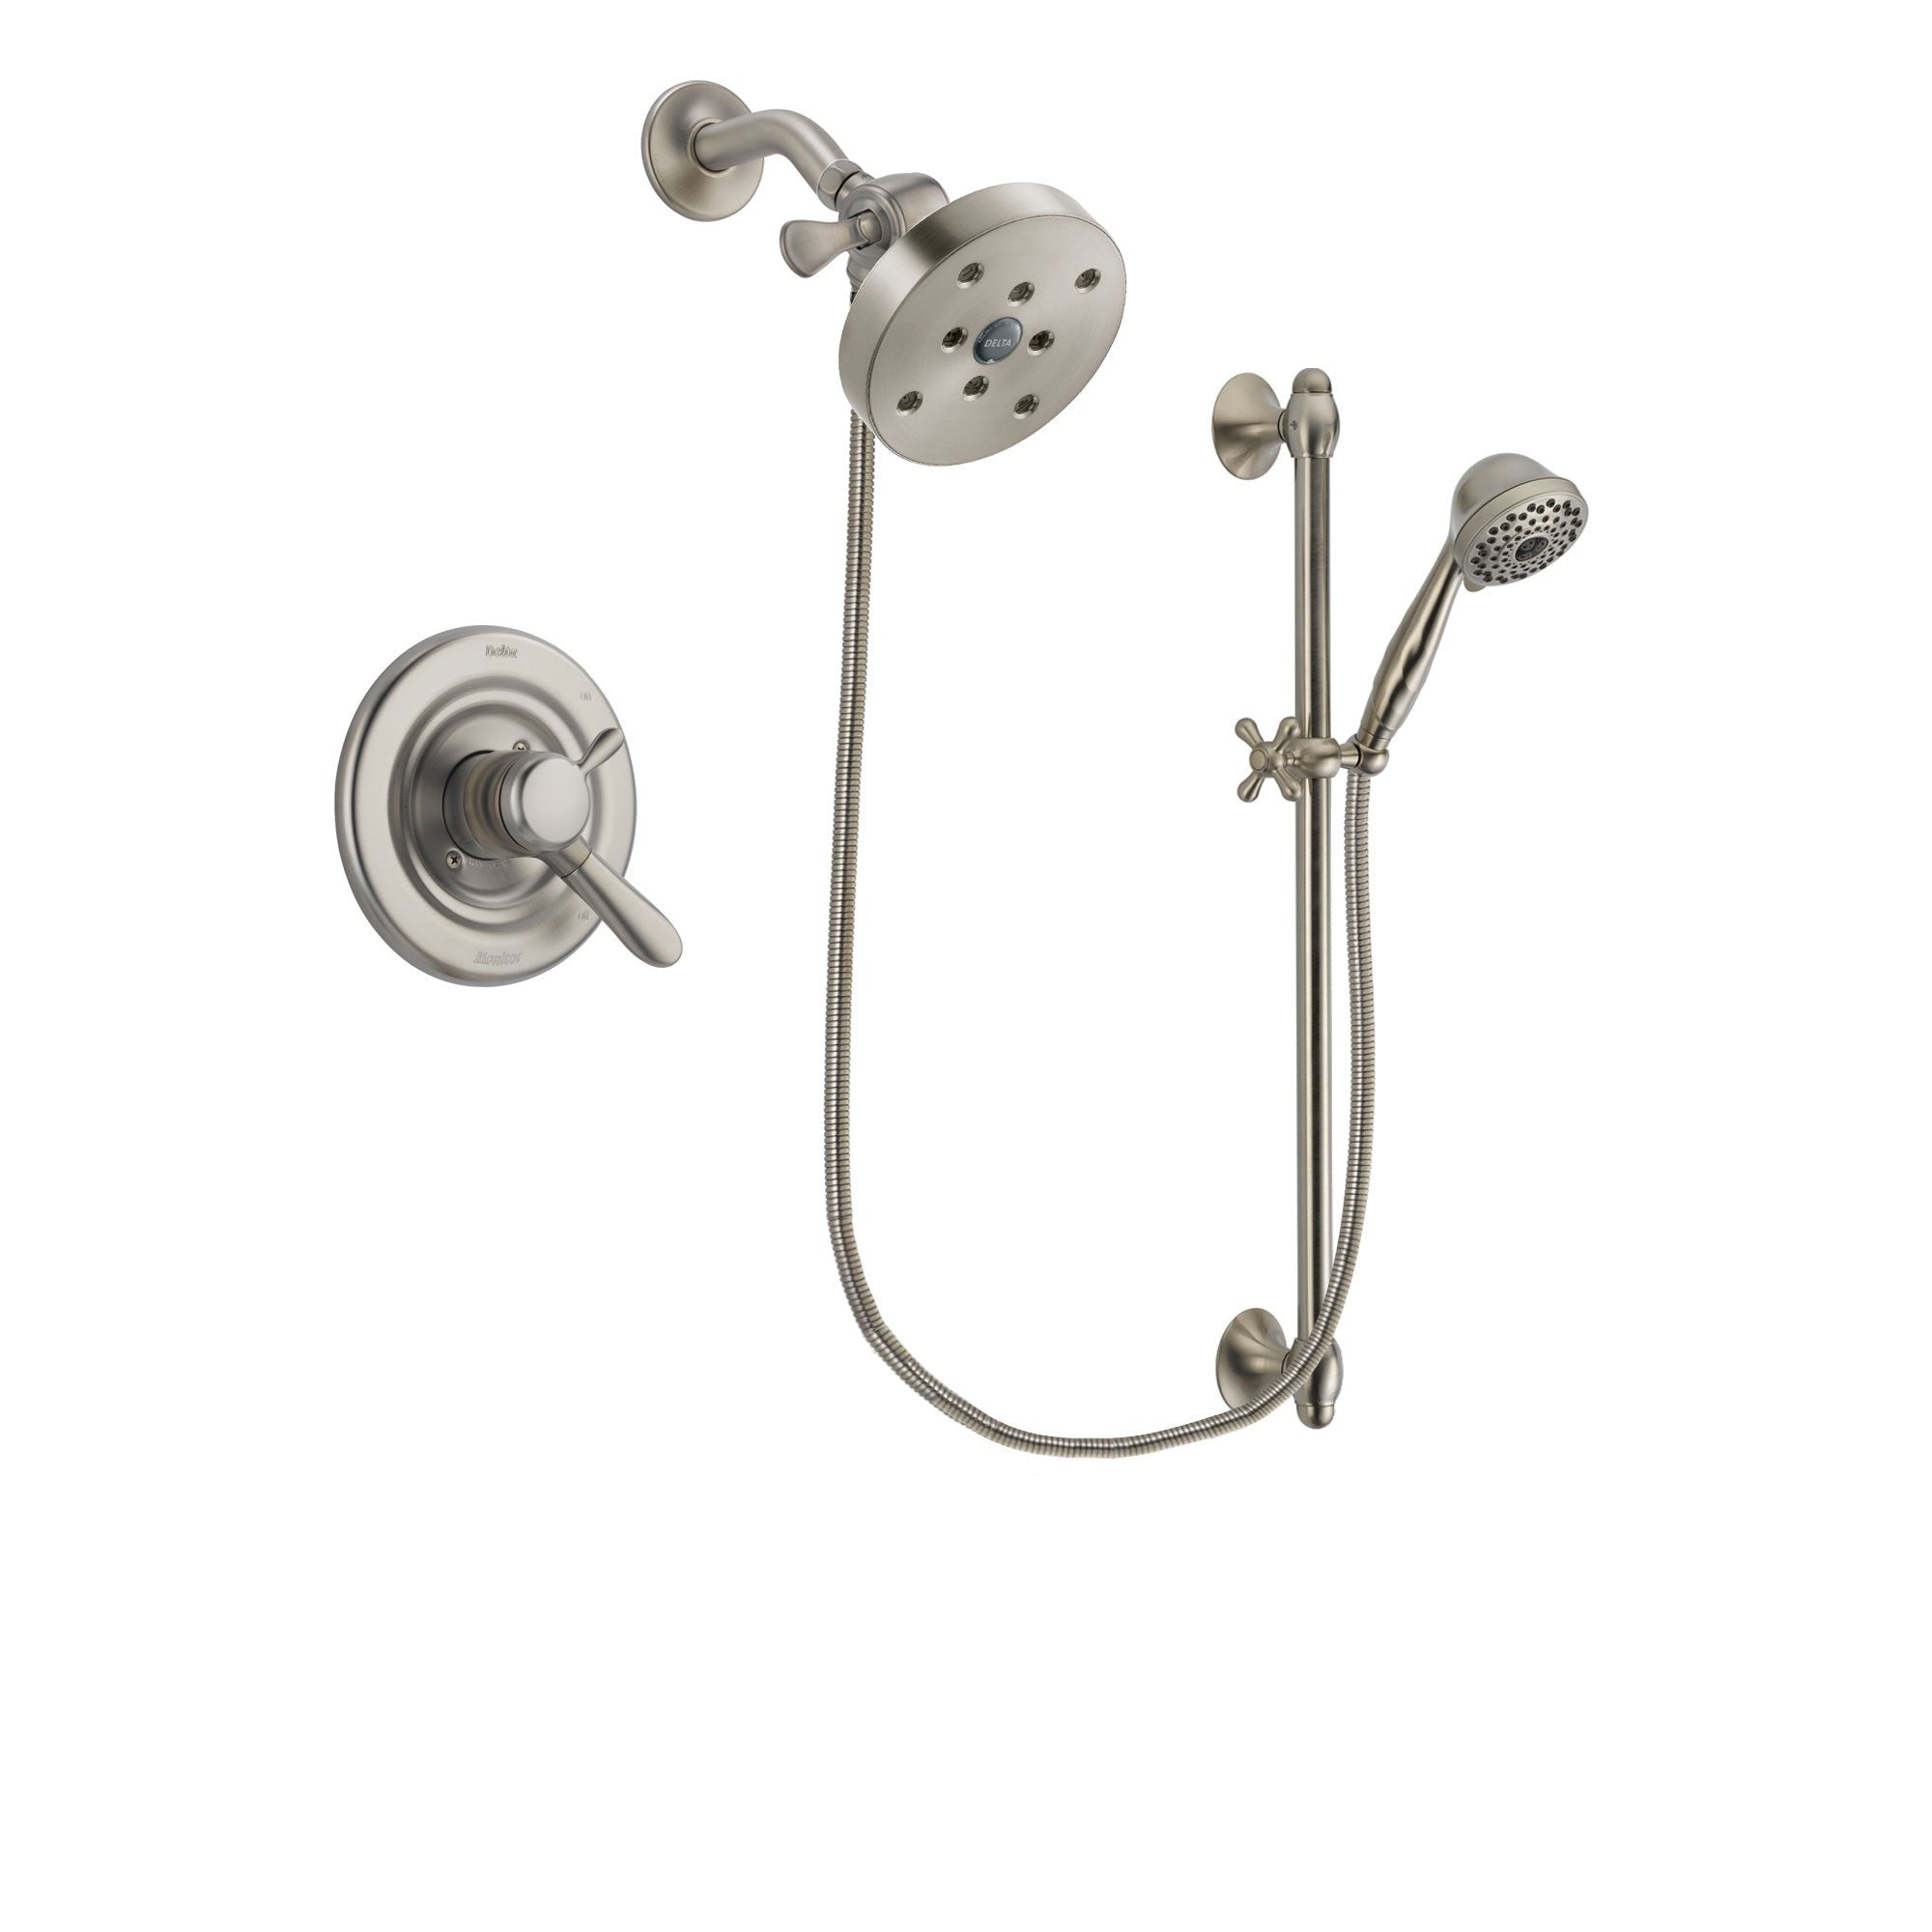 Delta Lahara Stainless Steel Finish Shower Faucet System w/ Hand Spray DSP1772V